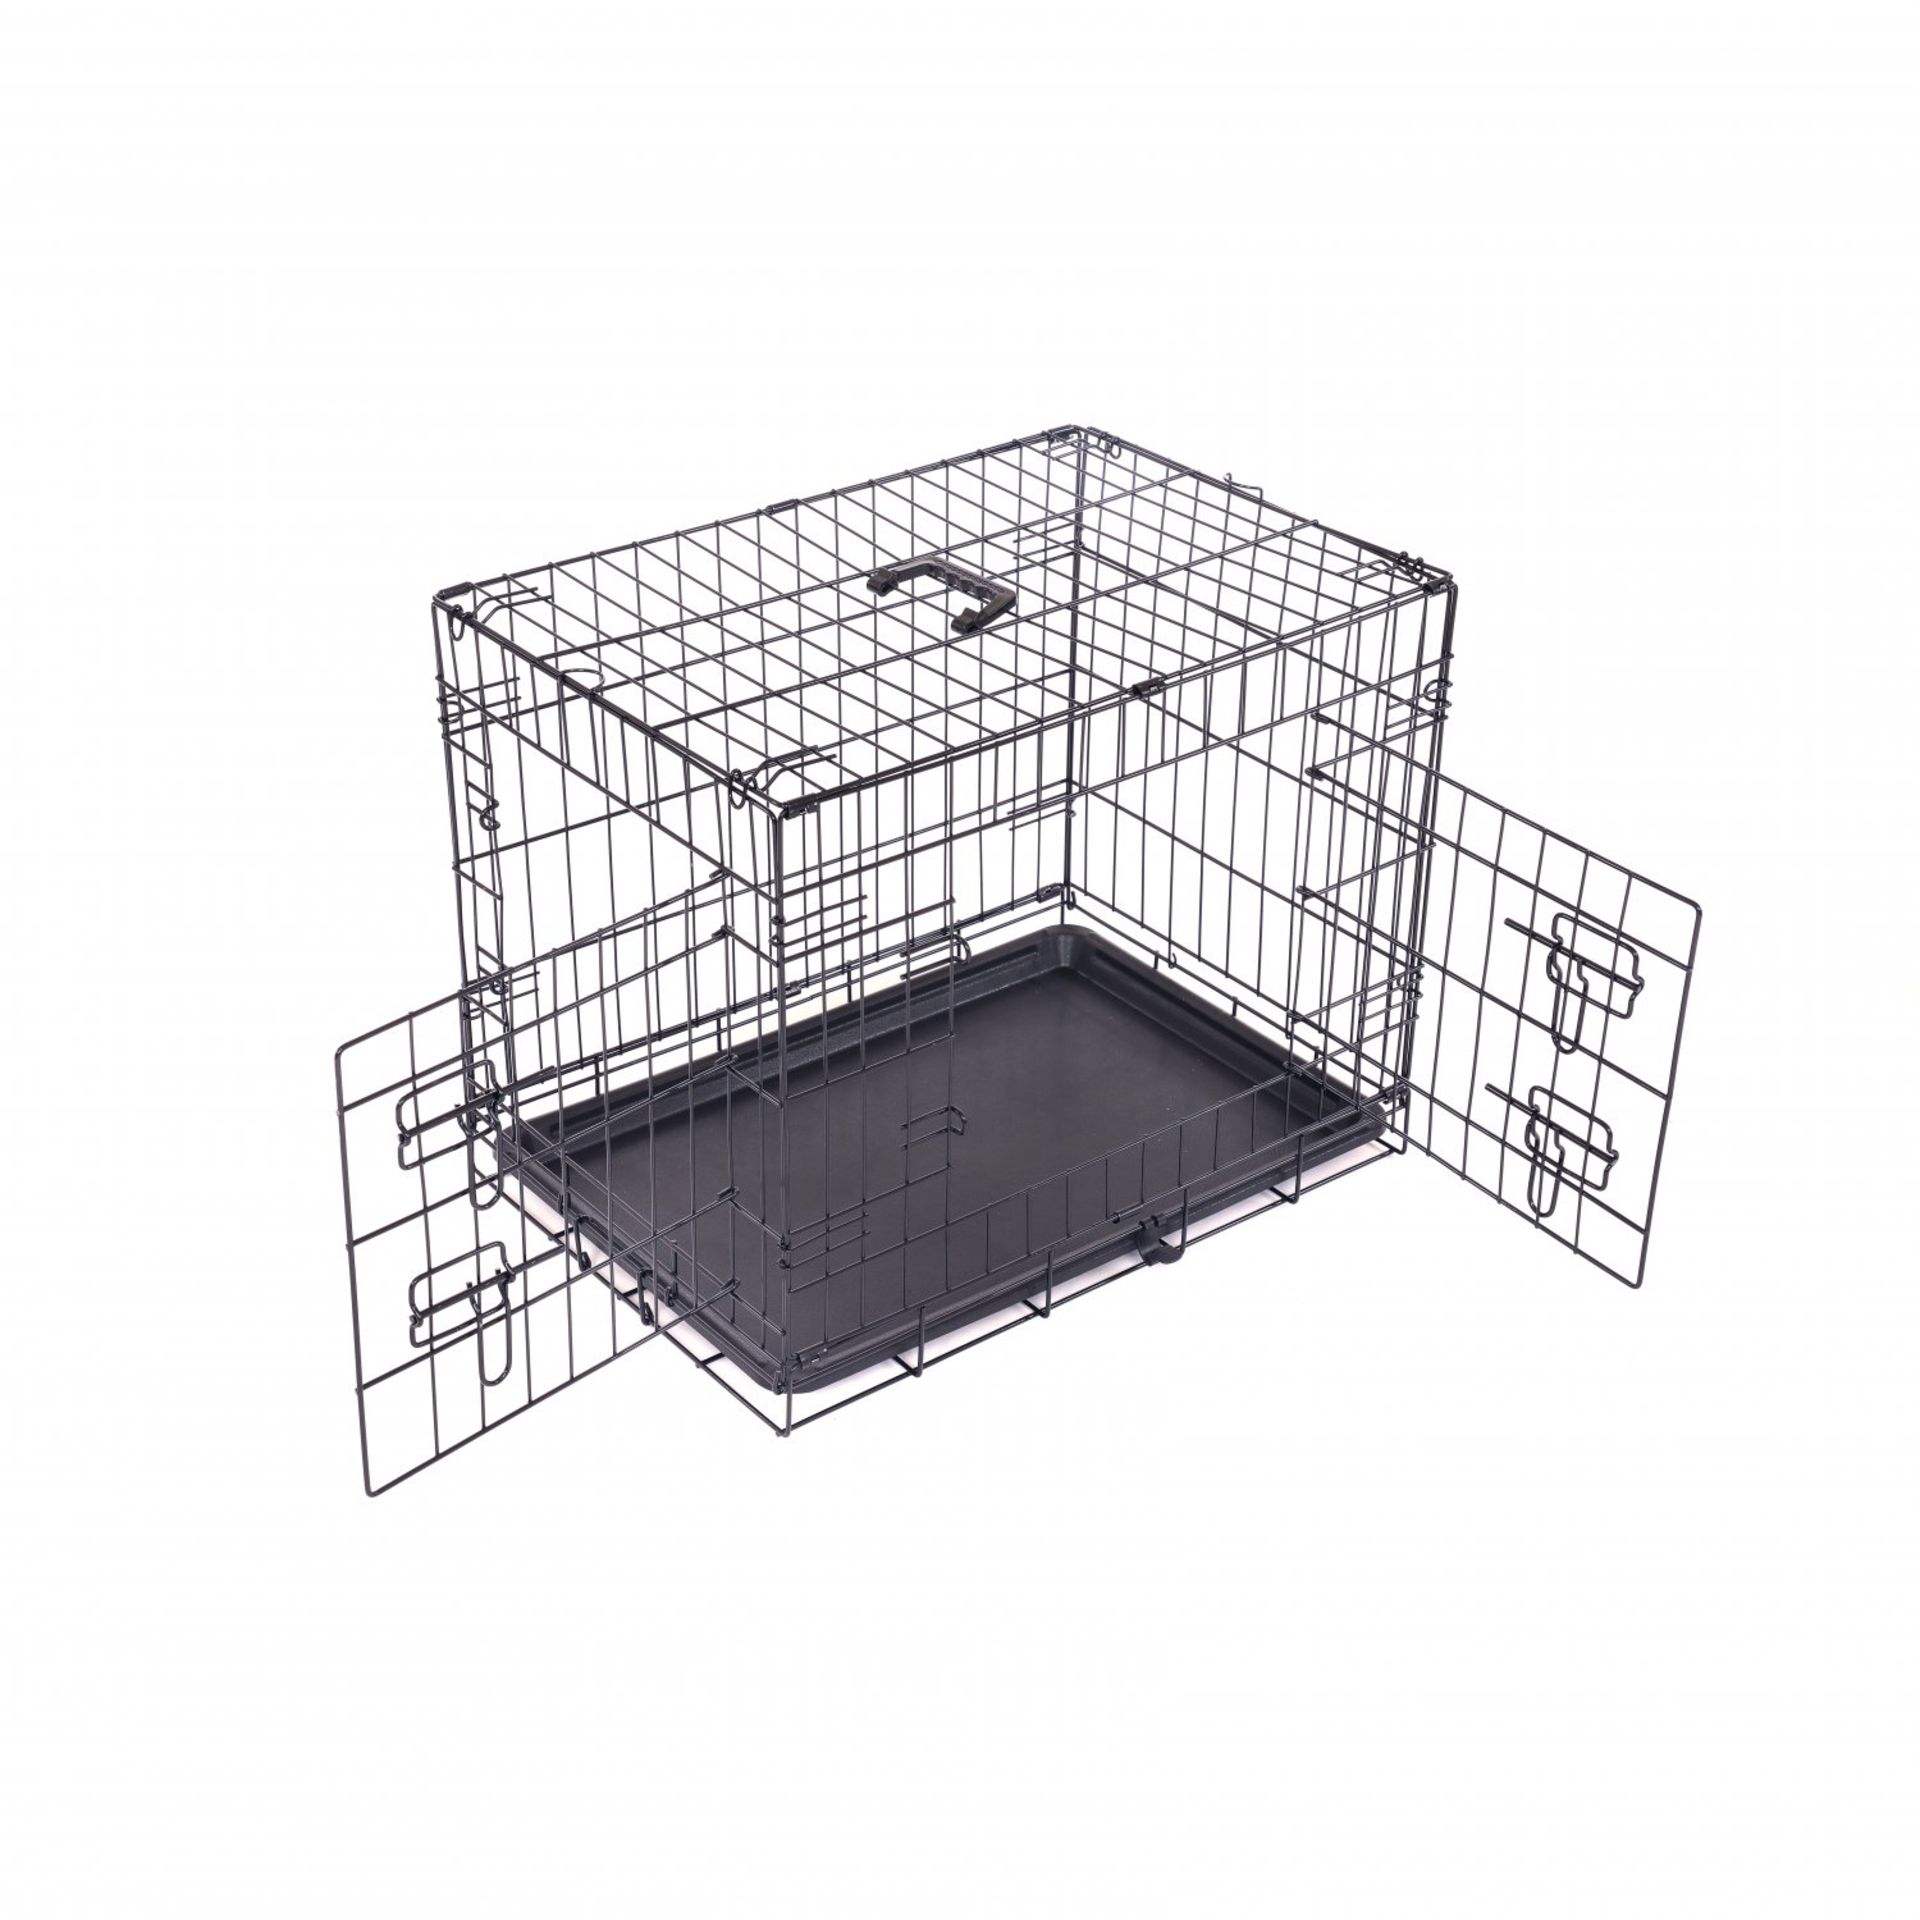 (TD108) 24" Folding Metal Dog Cage Puppy Transport Crate Pet Carrier The folding metal dog... - Image 2 of 2